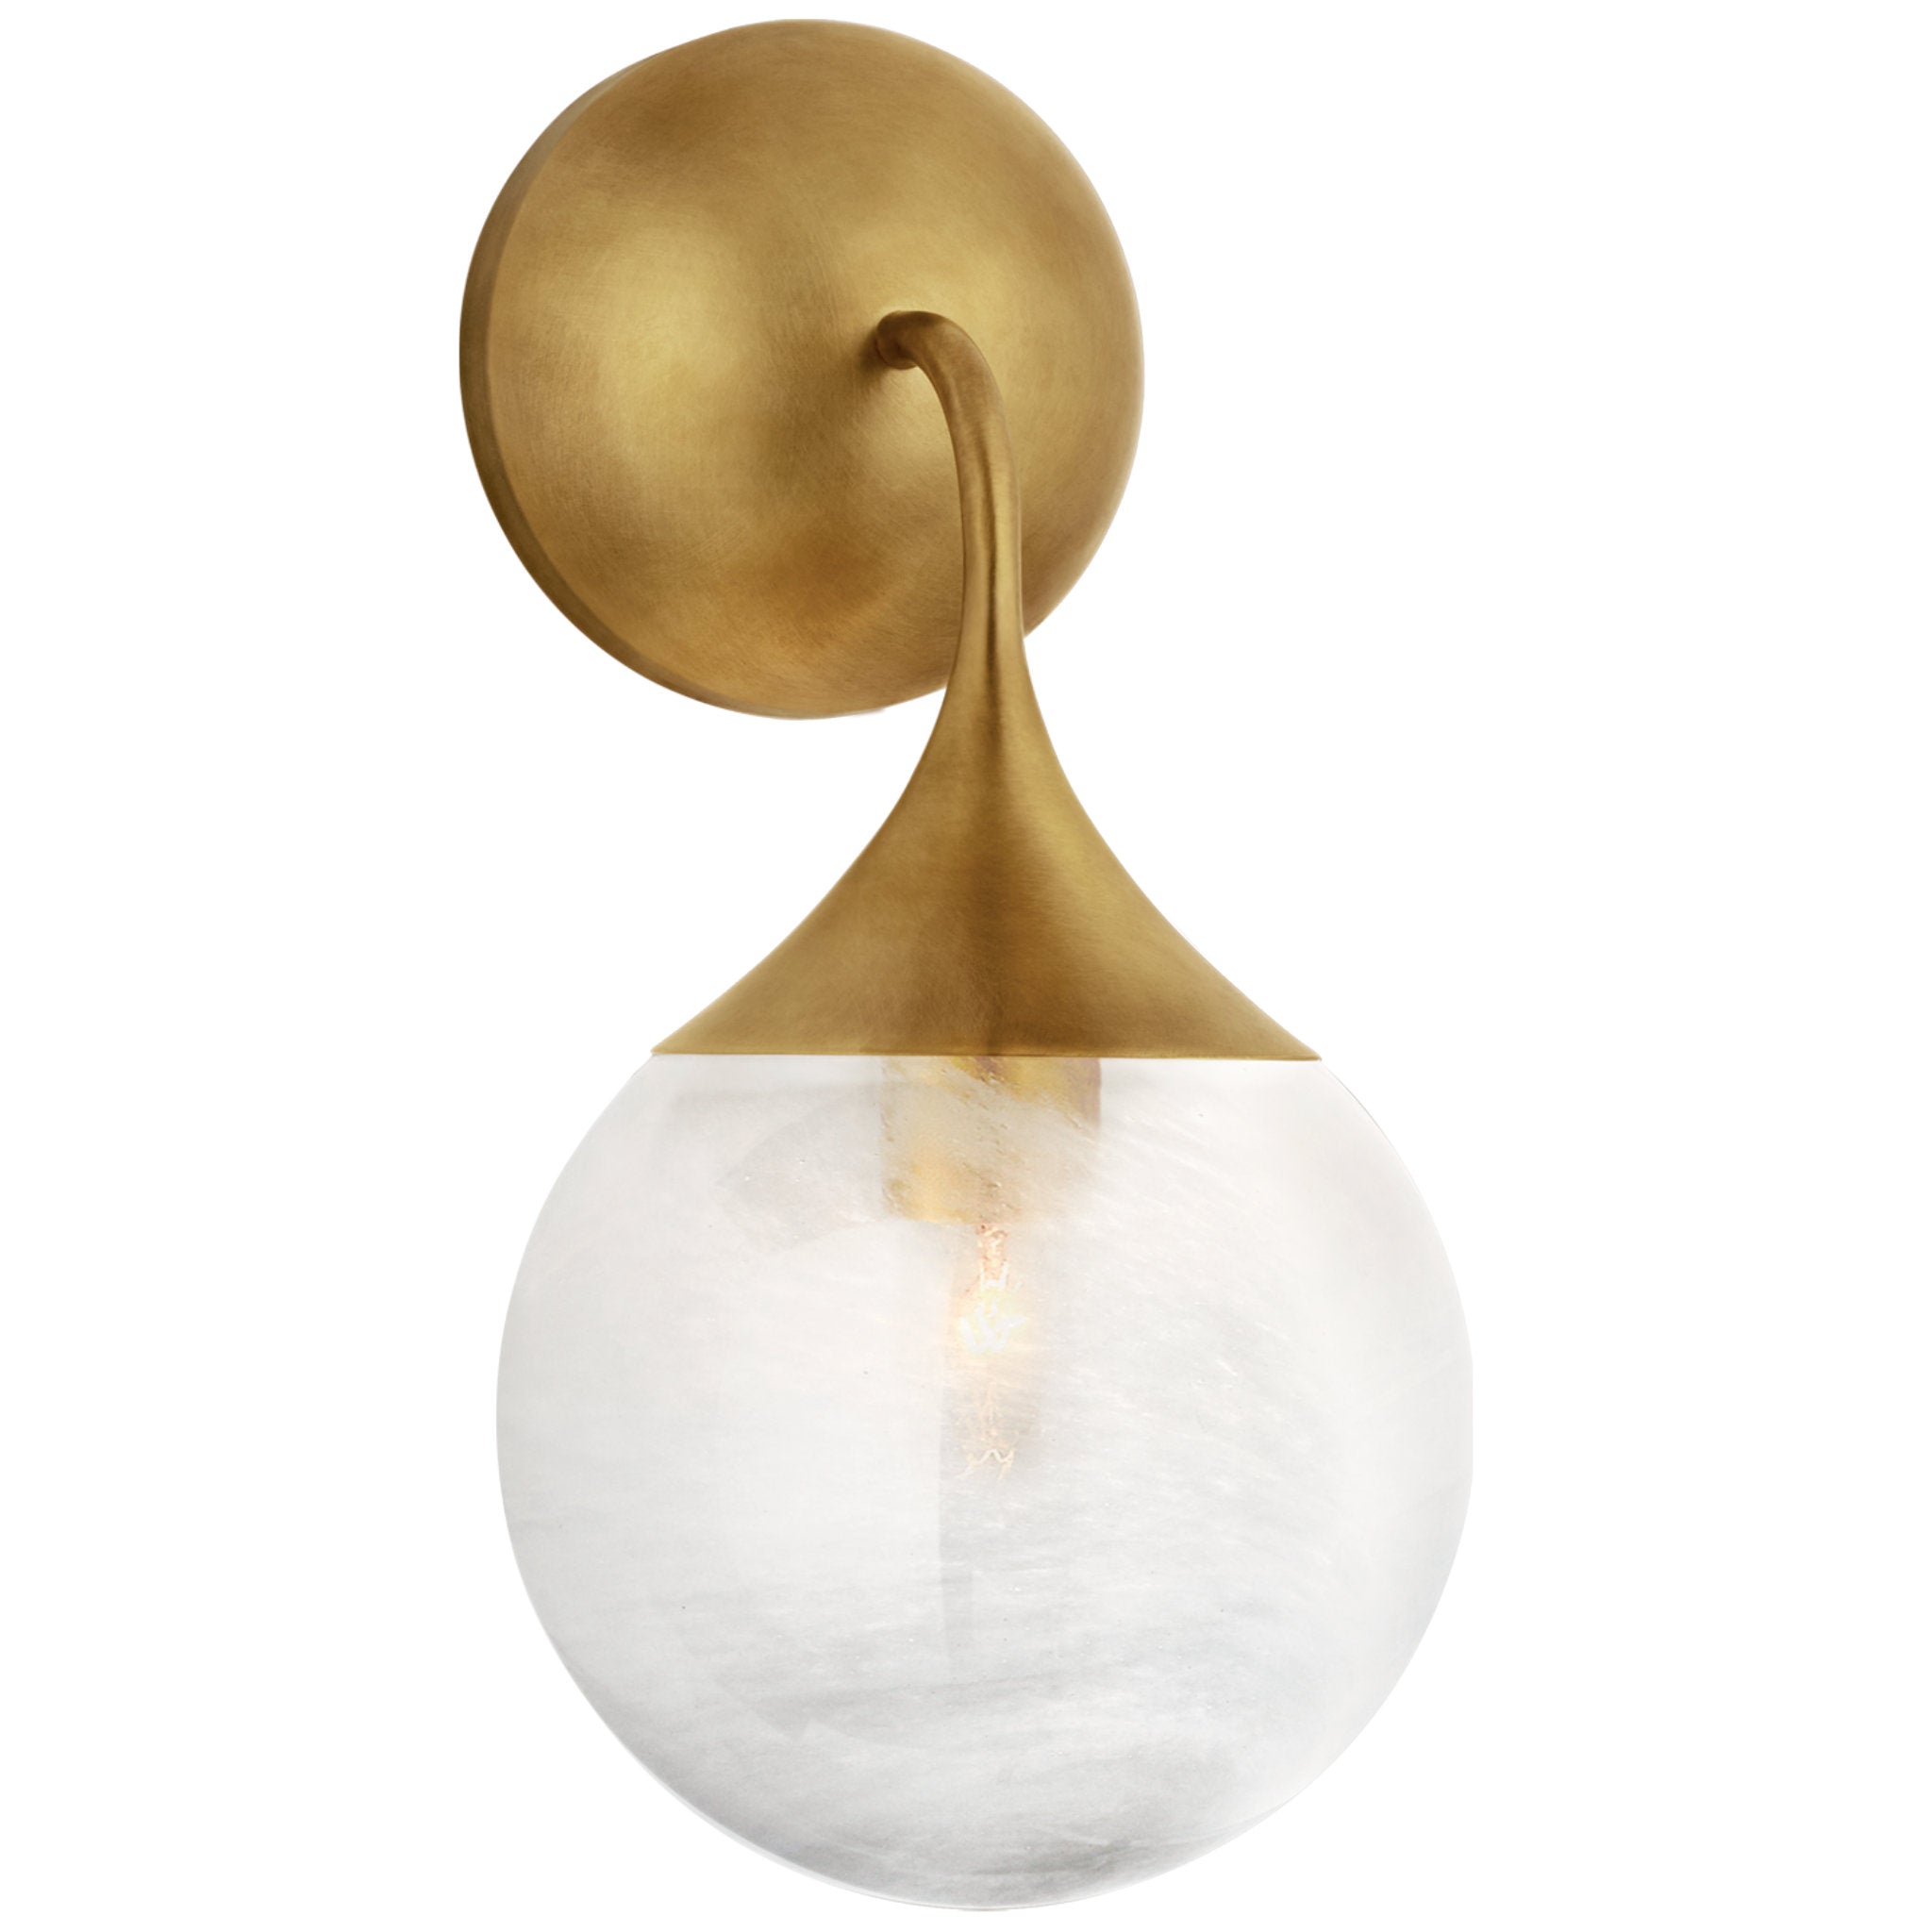 AERIN Cristol Small Single Sconce in Hand-Rubbed Antique Brass with White Glass